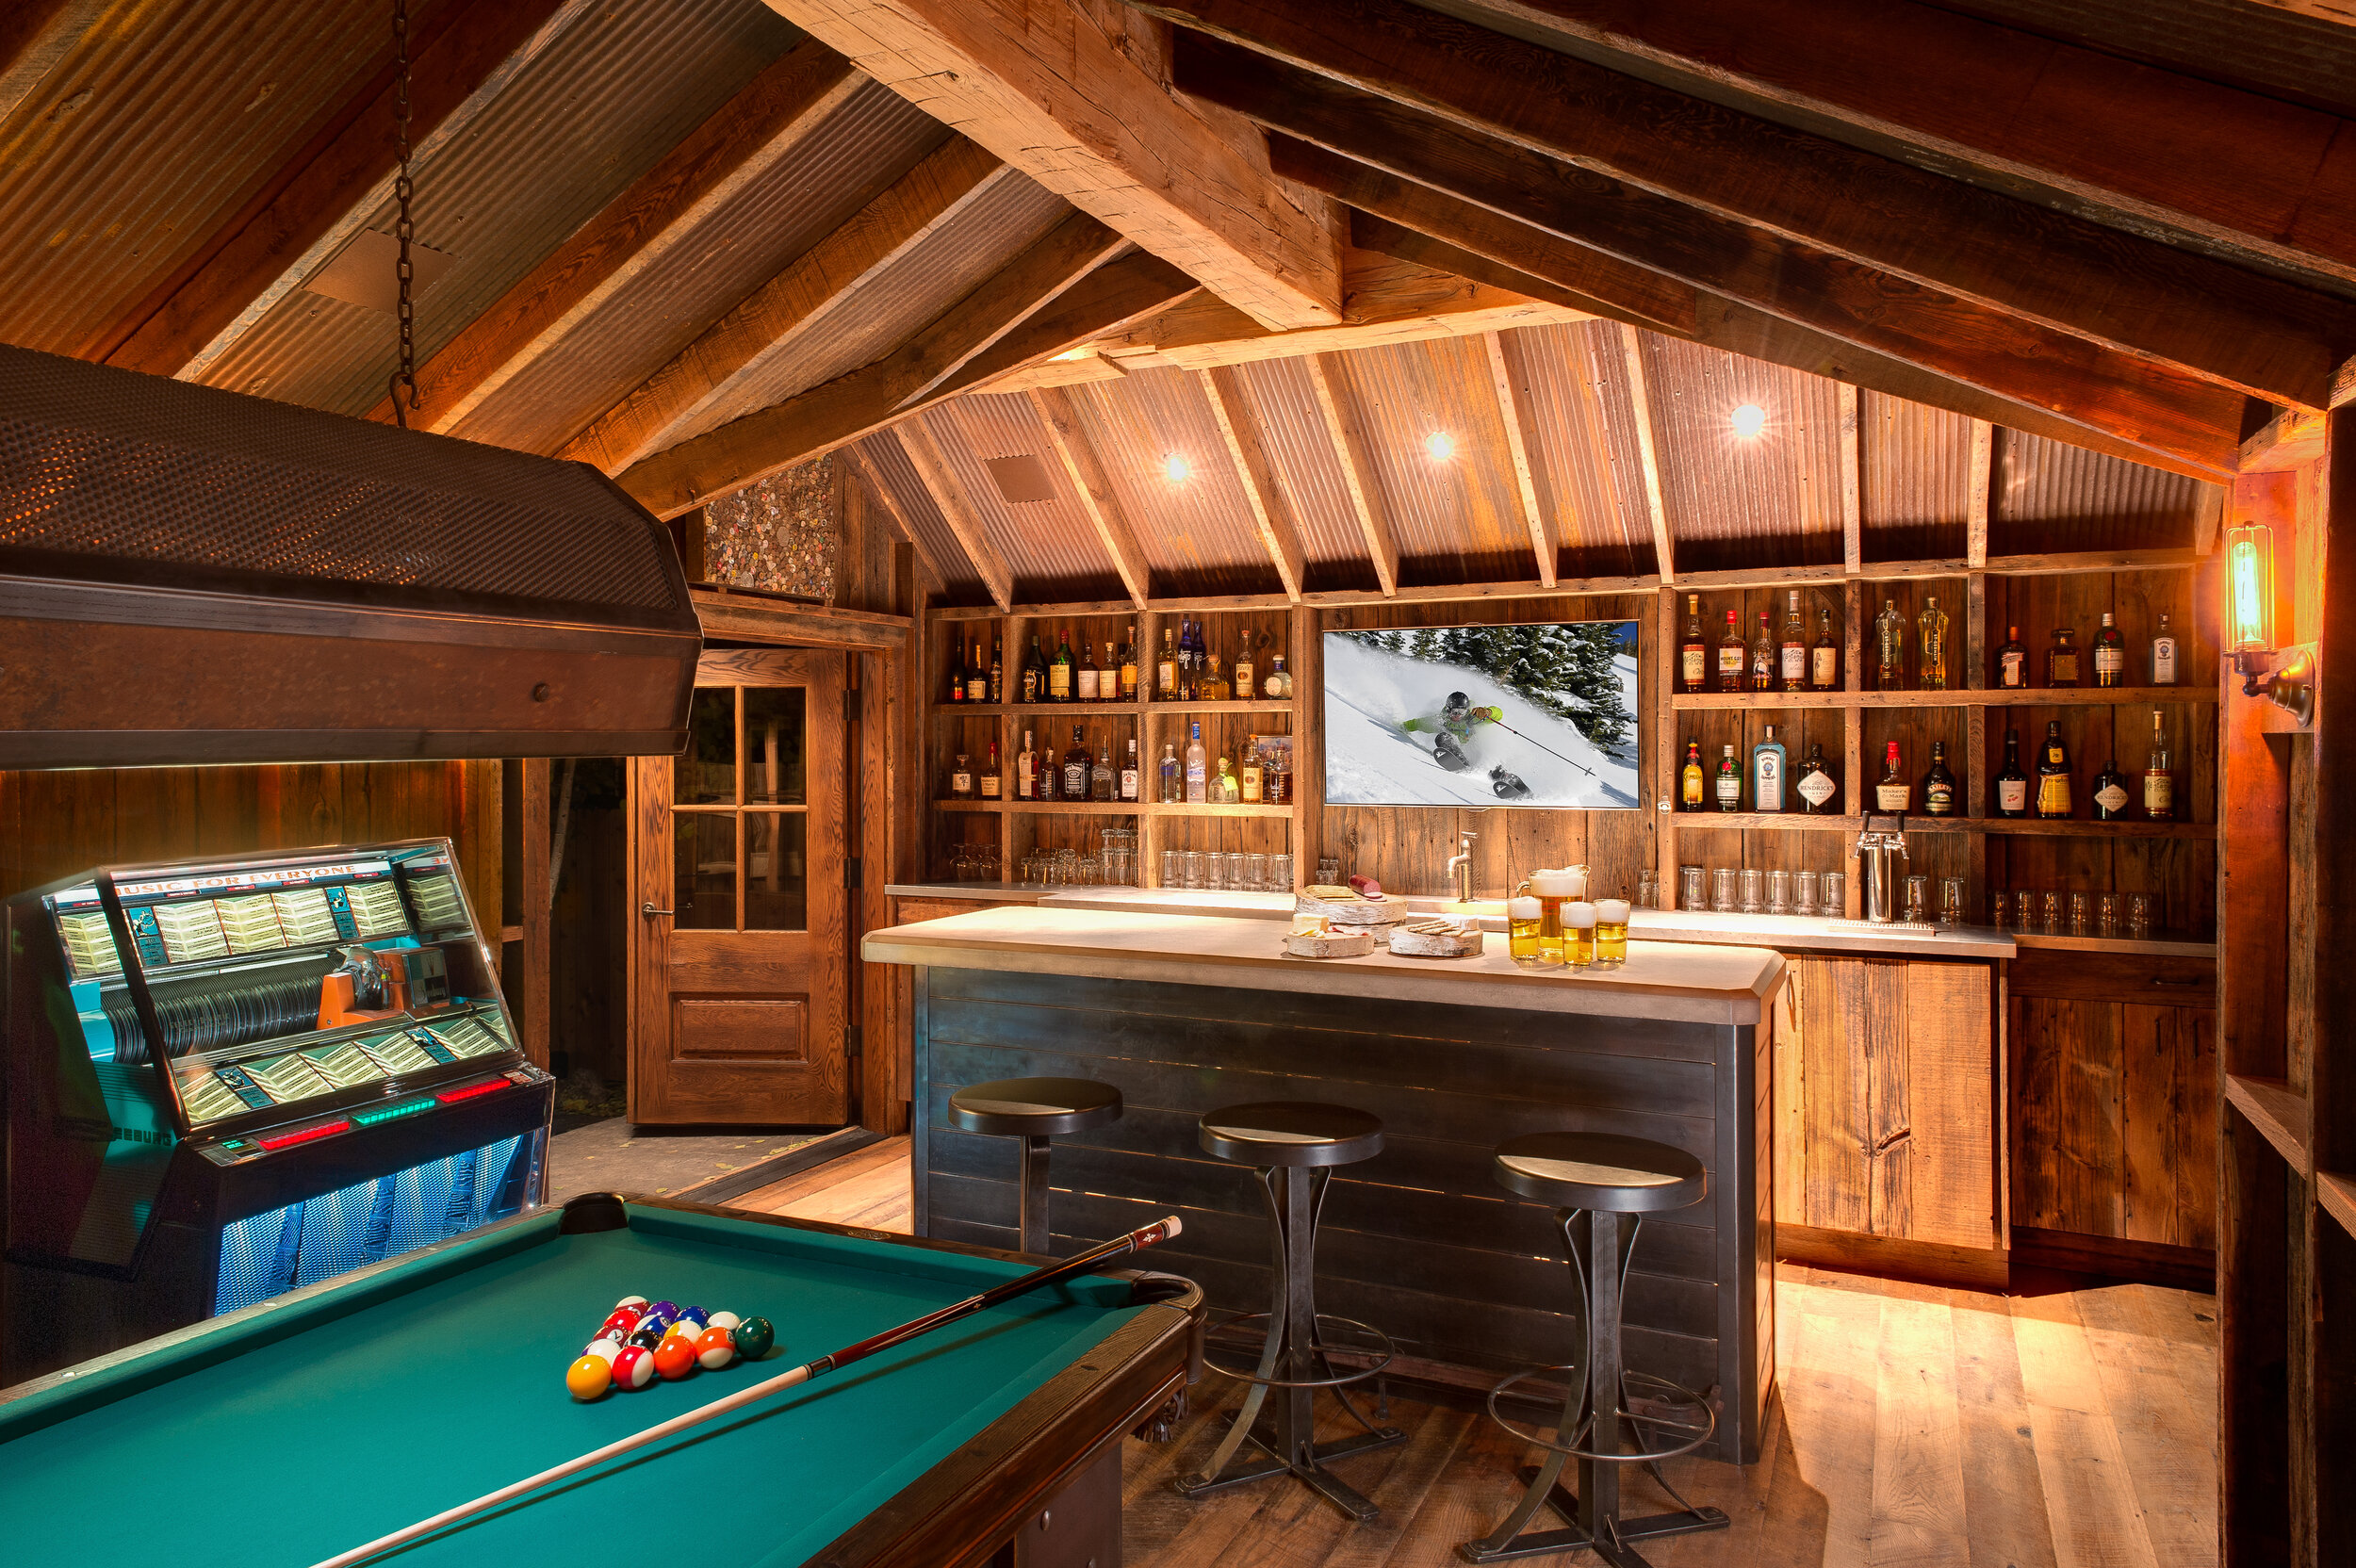   Saloon and game room at Sopris House (photo credit: Eleven Experience)  